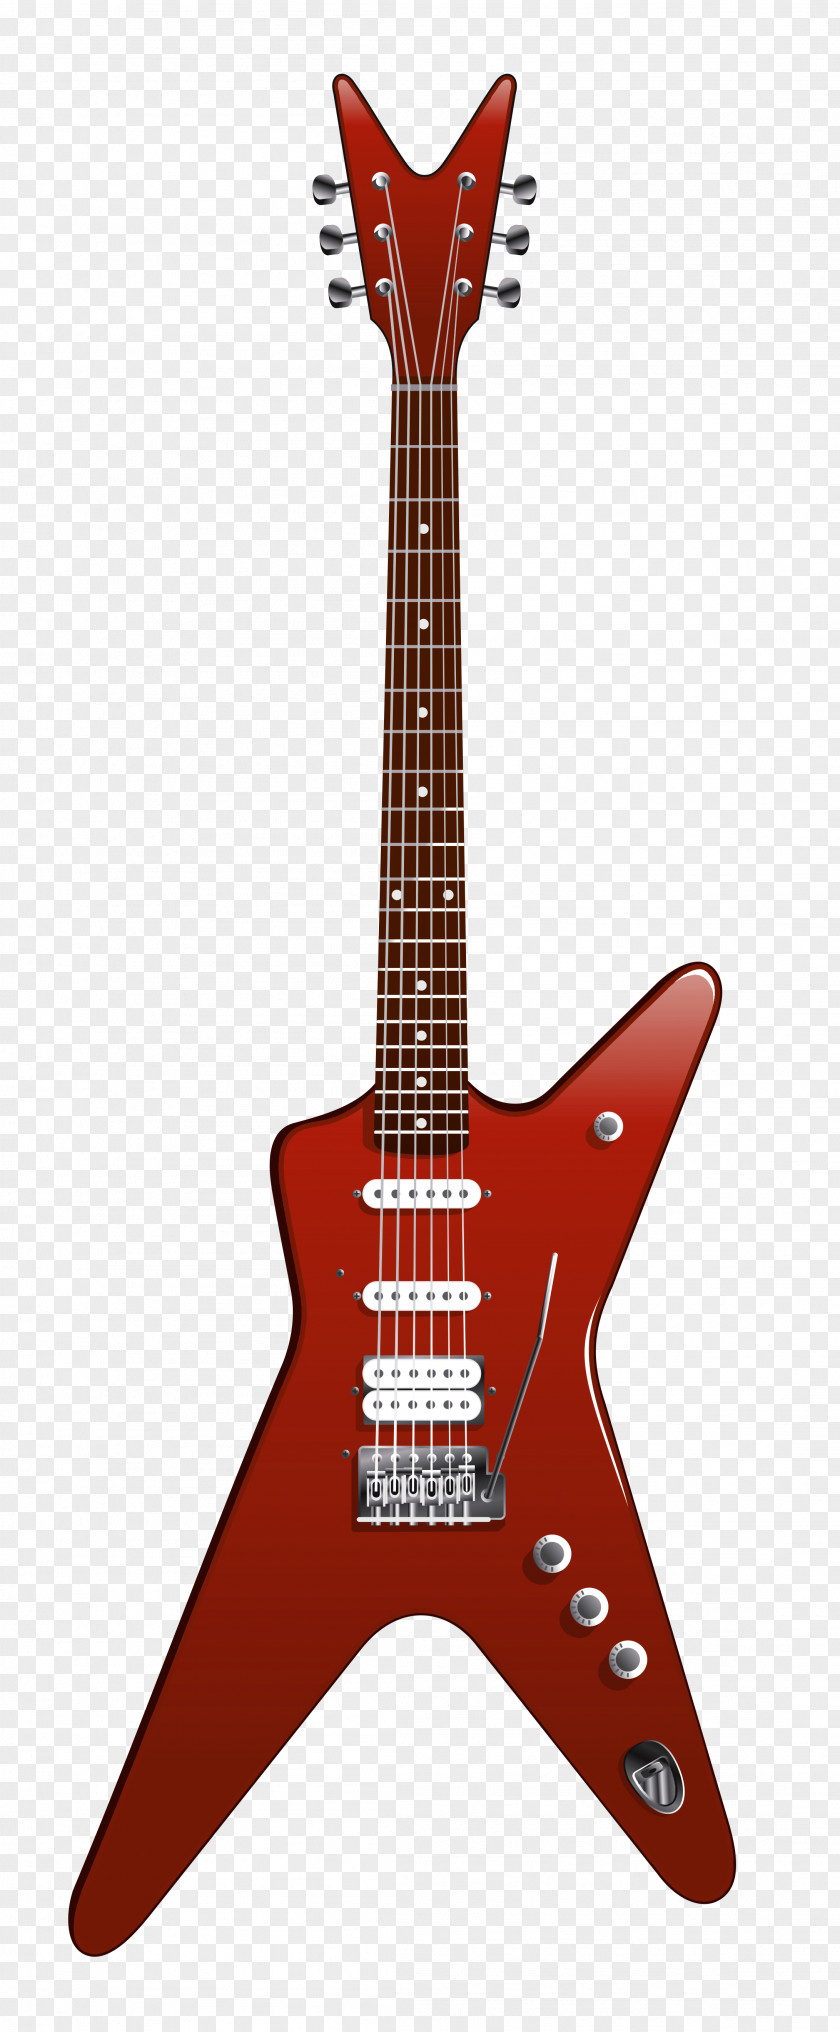 Guitar Fender Stratocaster Electric Musical Instruments Clip Art PNG